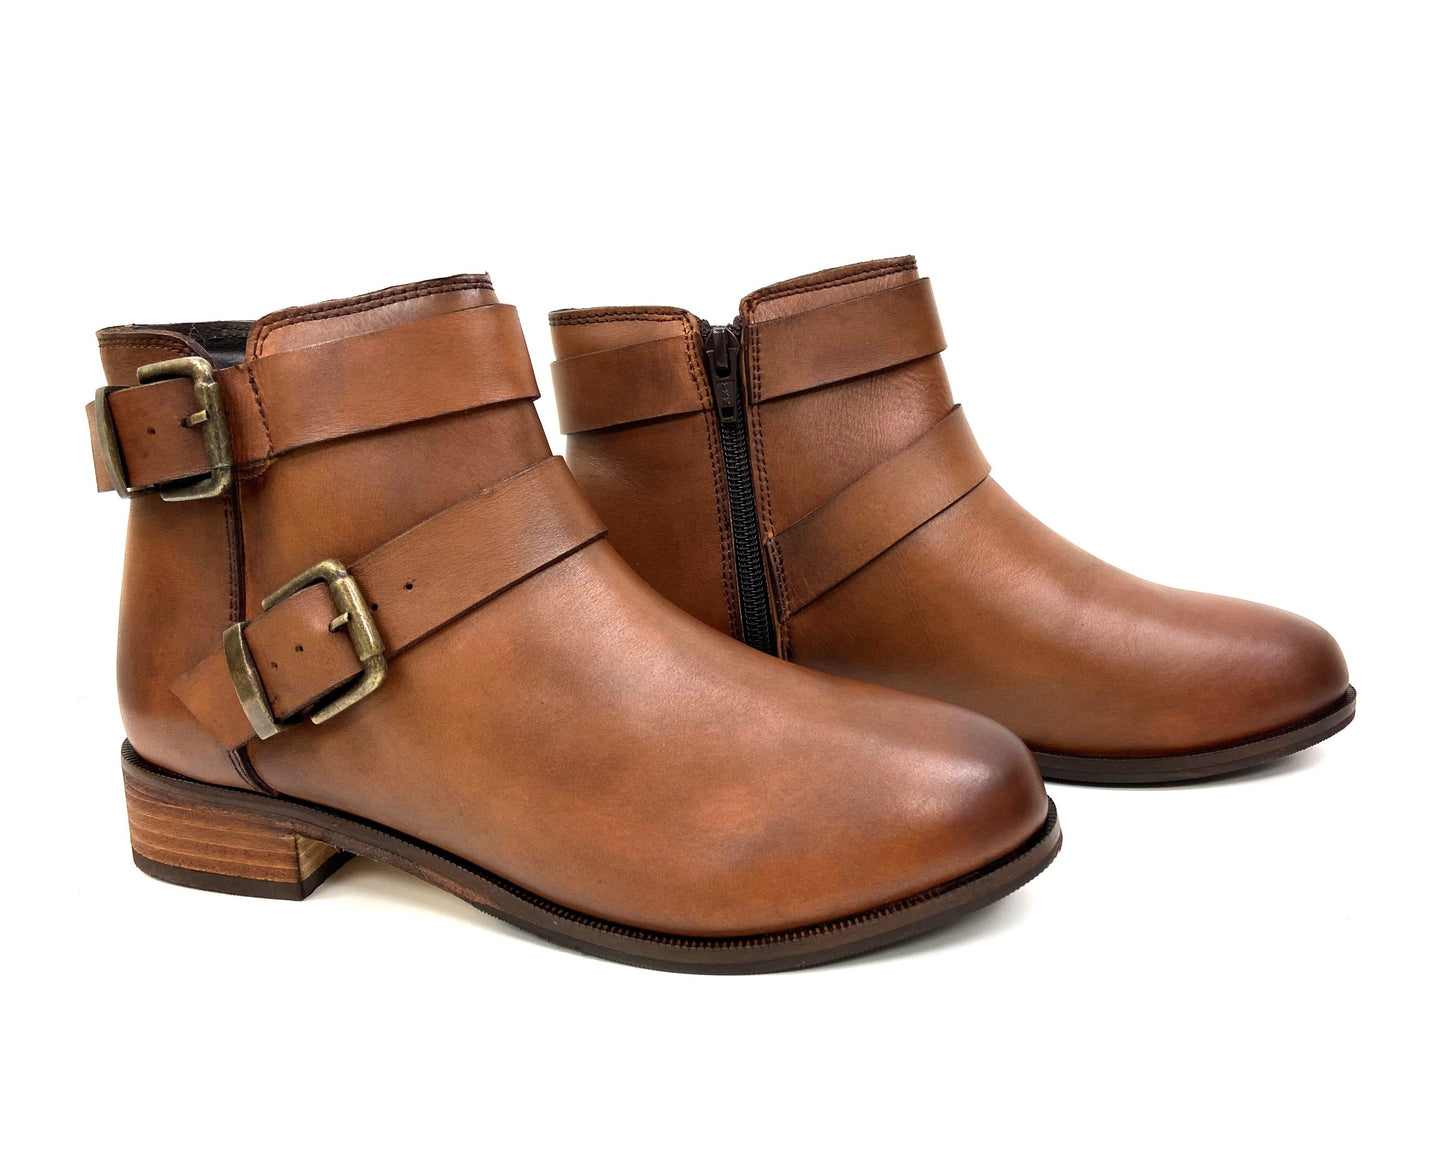 Low stacked heel Ankle Boots Tan leather 